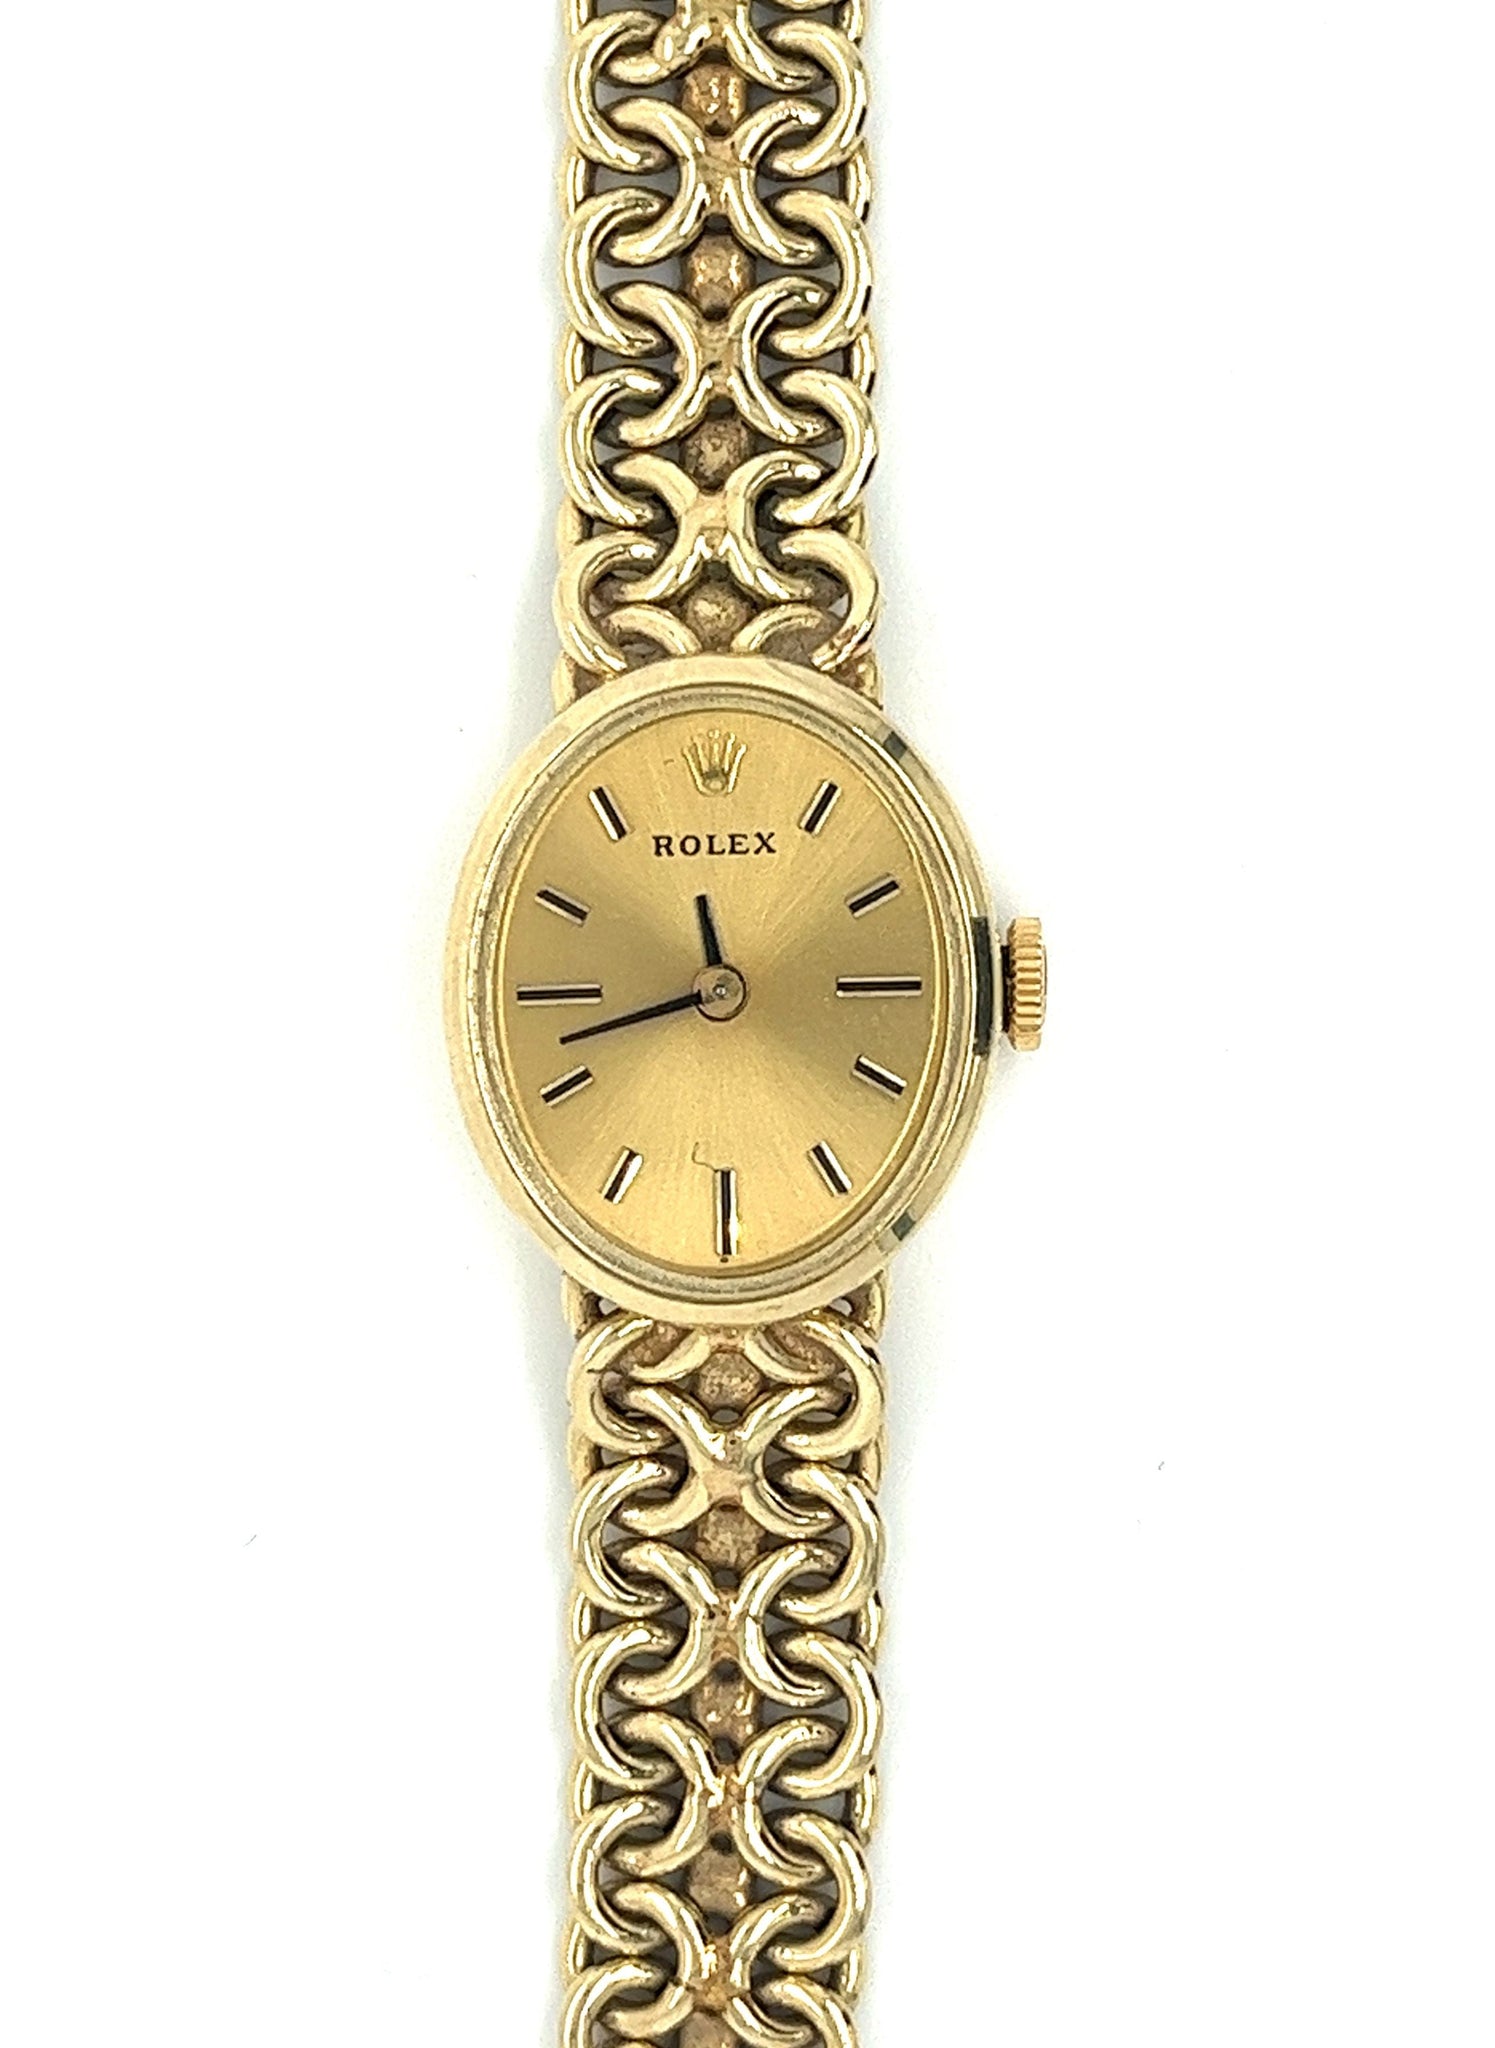 Vintage Rolex 17.5MM Manual Wind Ladies Watch in 14K Gold With Milanese/Mesh Band Circa 1960